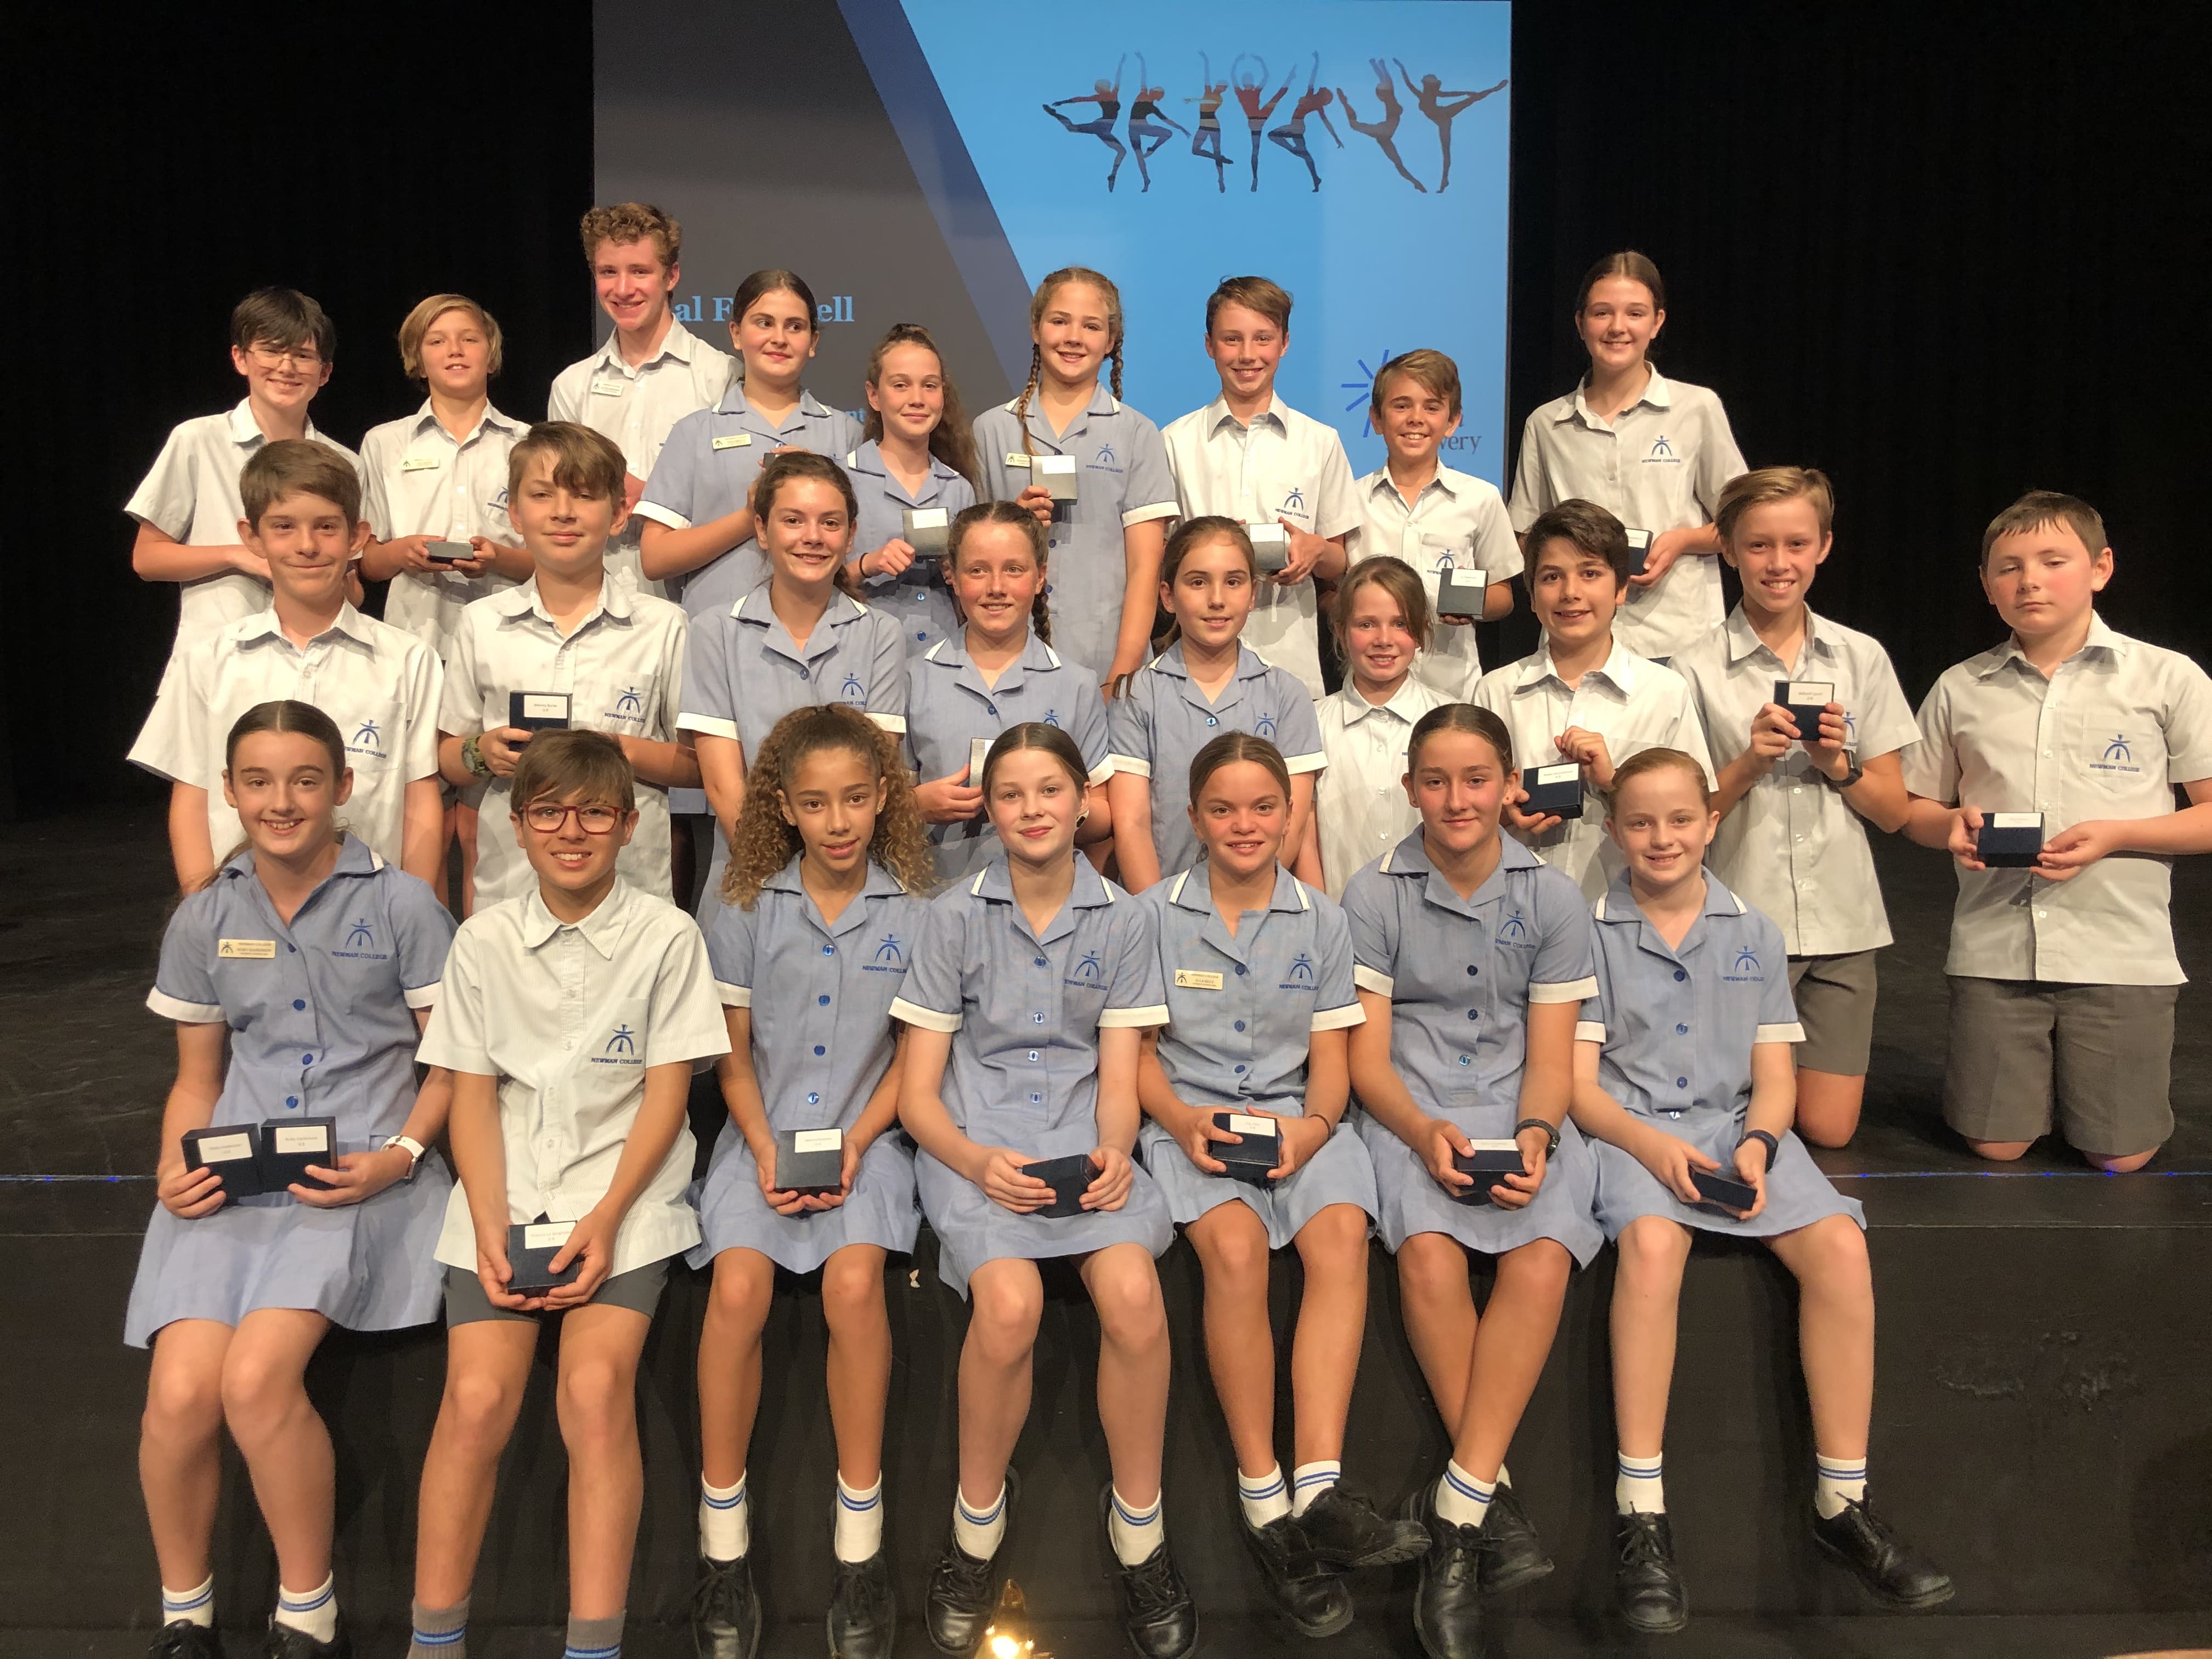 Newman News Term 4 Week 9 2020: From the Leader of Wellbeing Primary